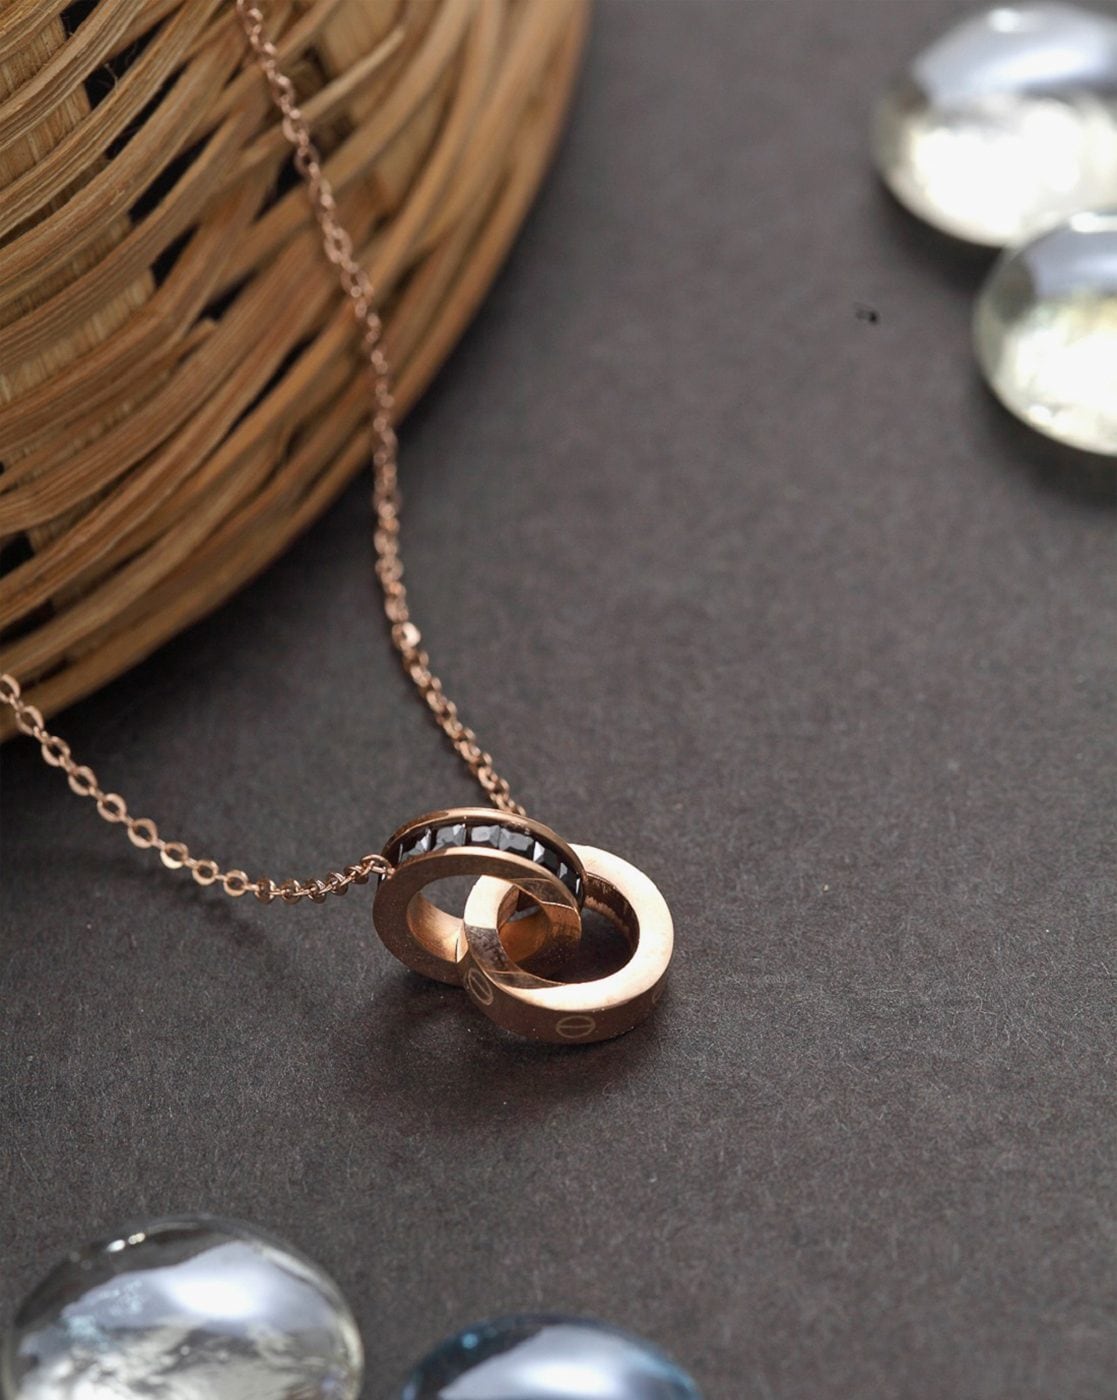 Not knowing the Ring Necklace Meaning? Competitors are Beating You - TTT  Jewelry